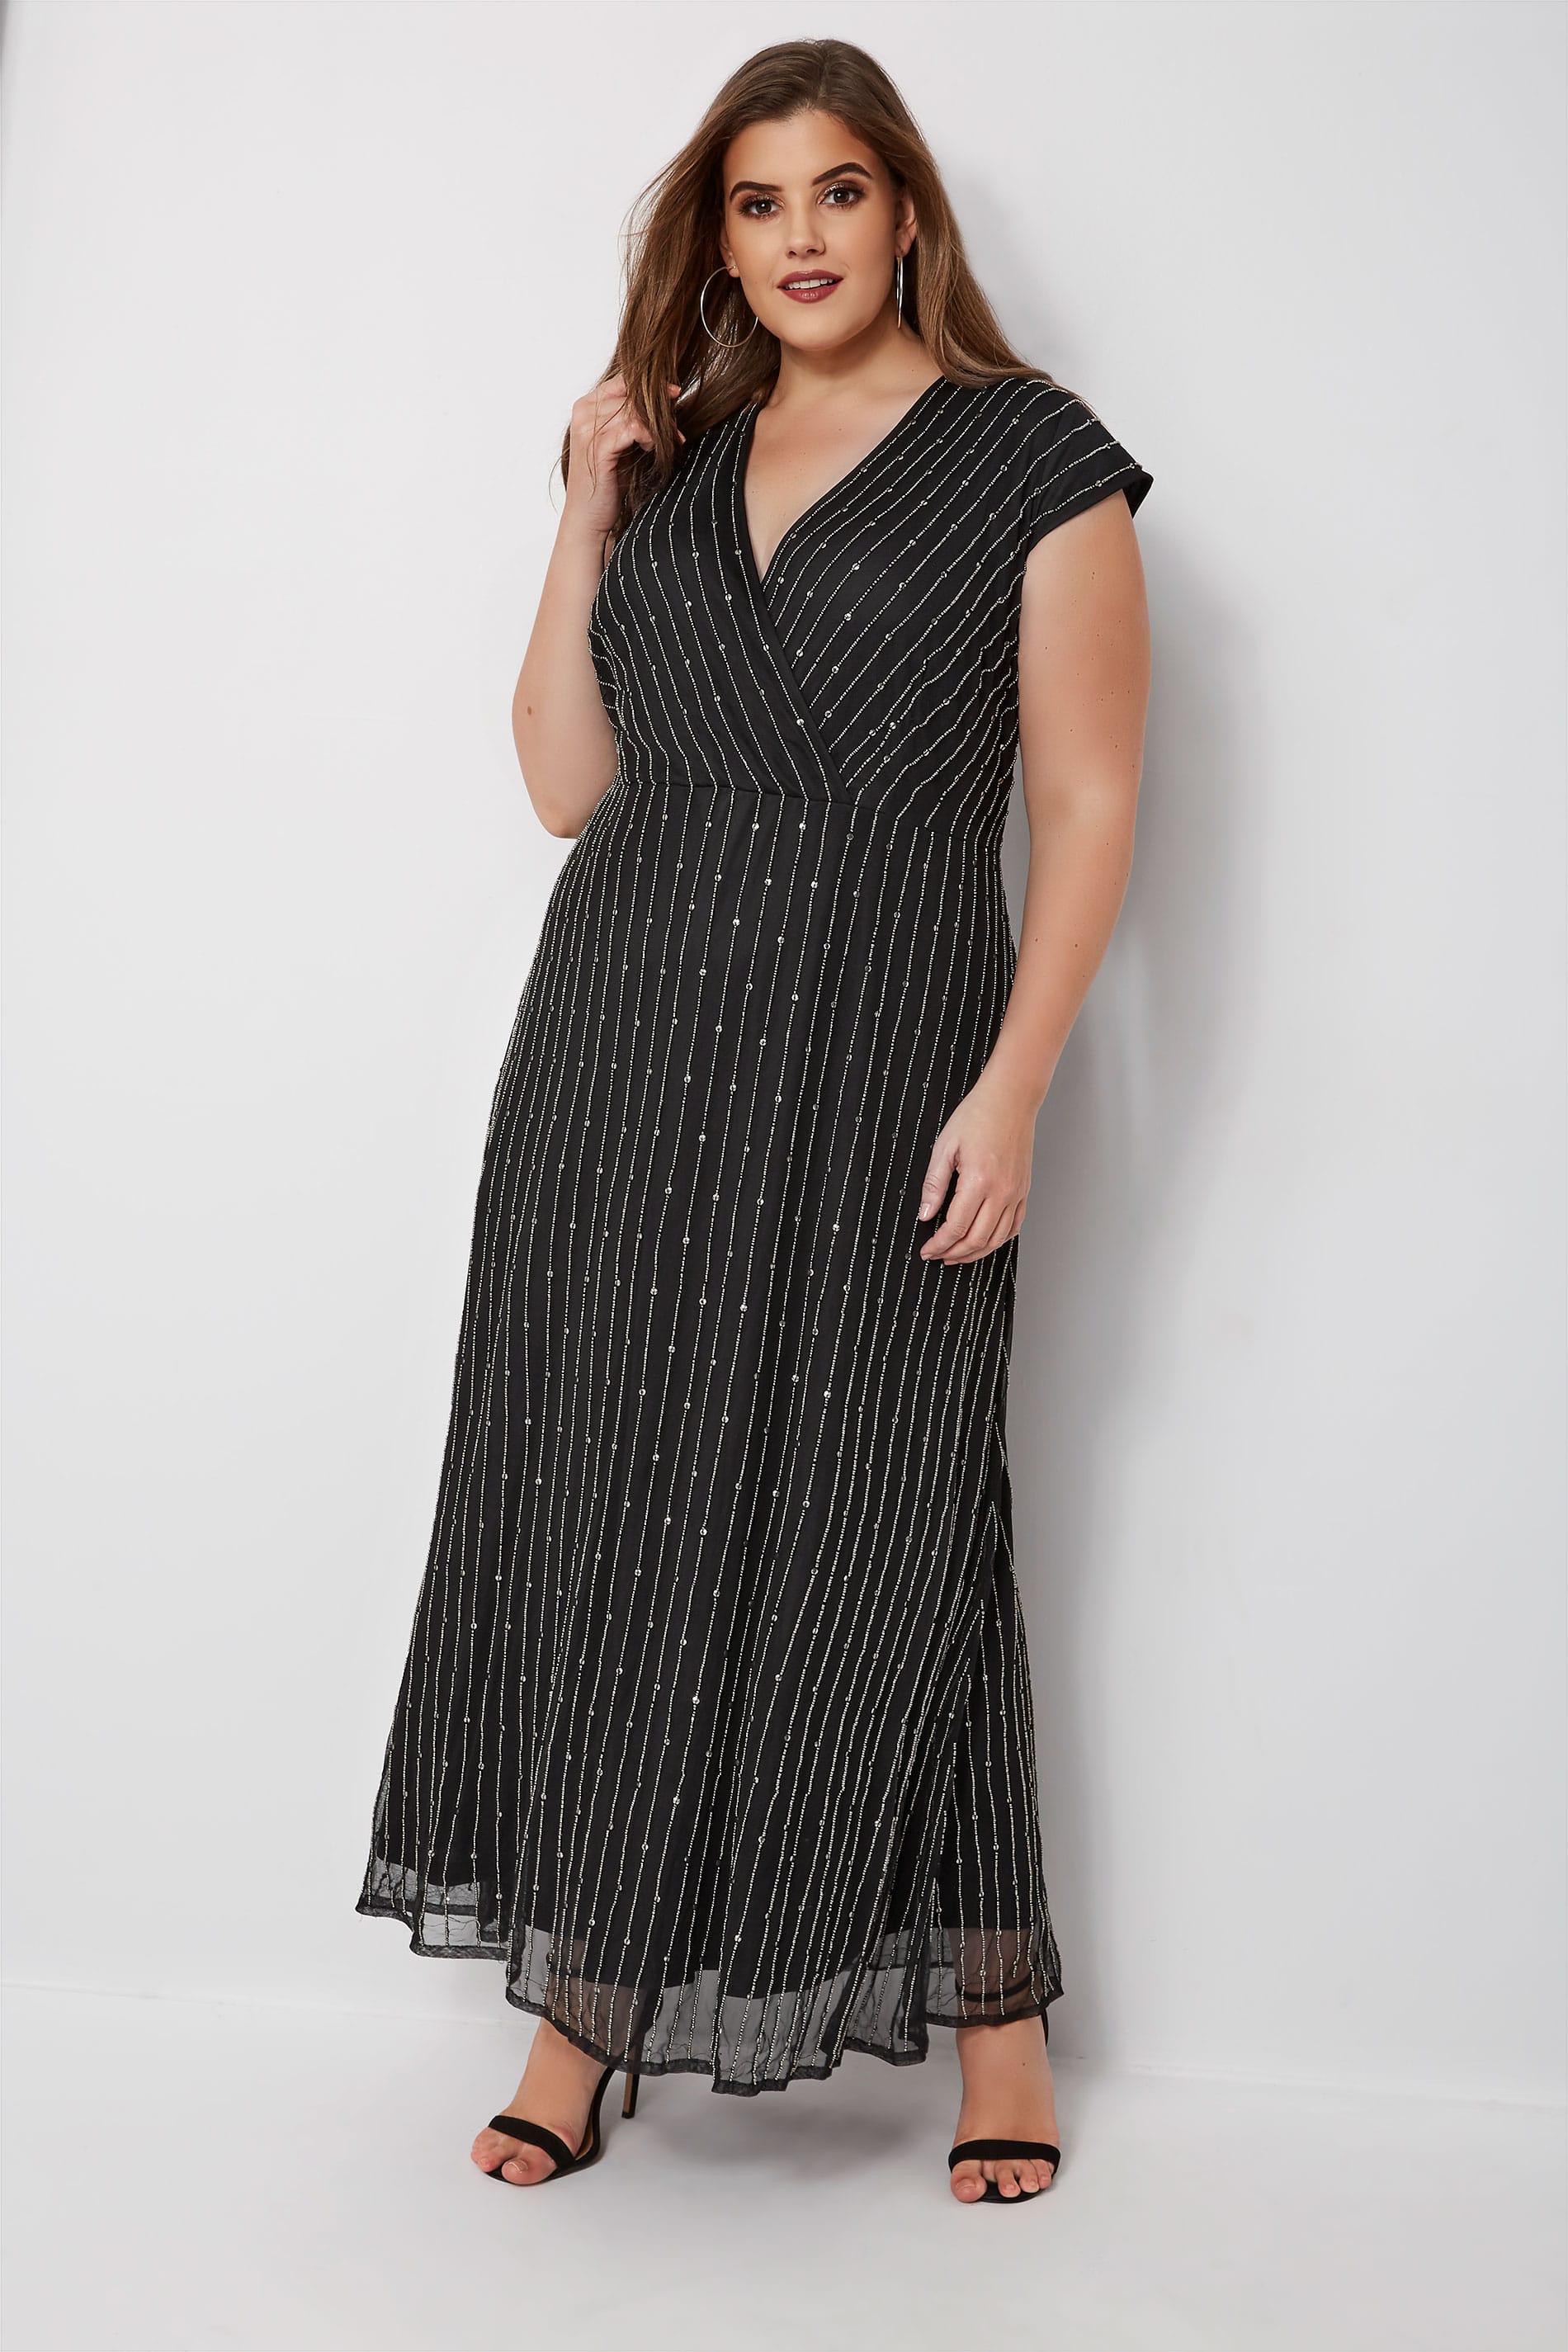 LUXE Black Wrap Over Embellished Maxi Dress, Plus size 16 to 32